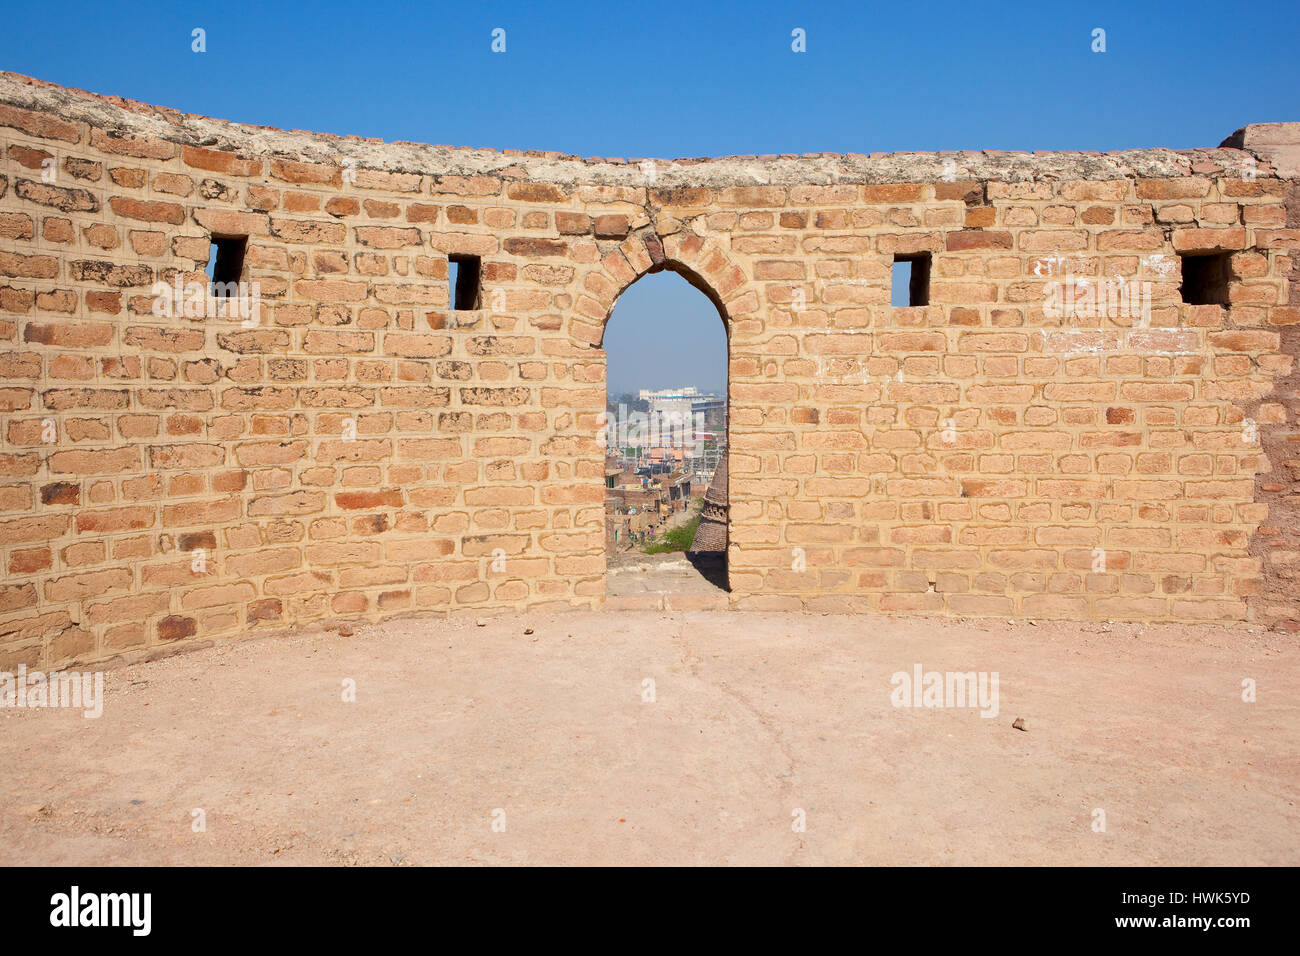 an historic archway at bhatner fort hanumangarh india with a view of the town under a blue sky Stock Photo